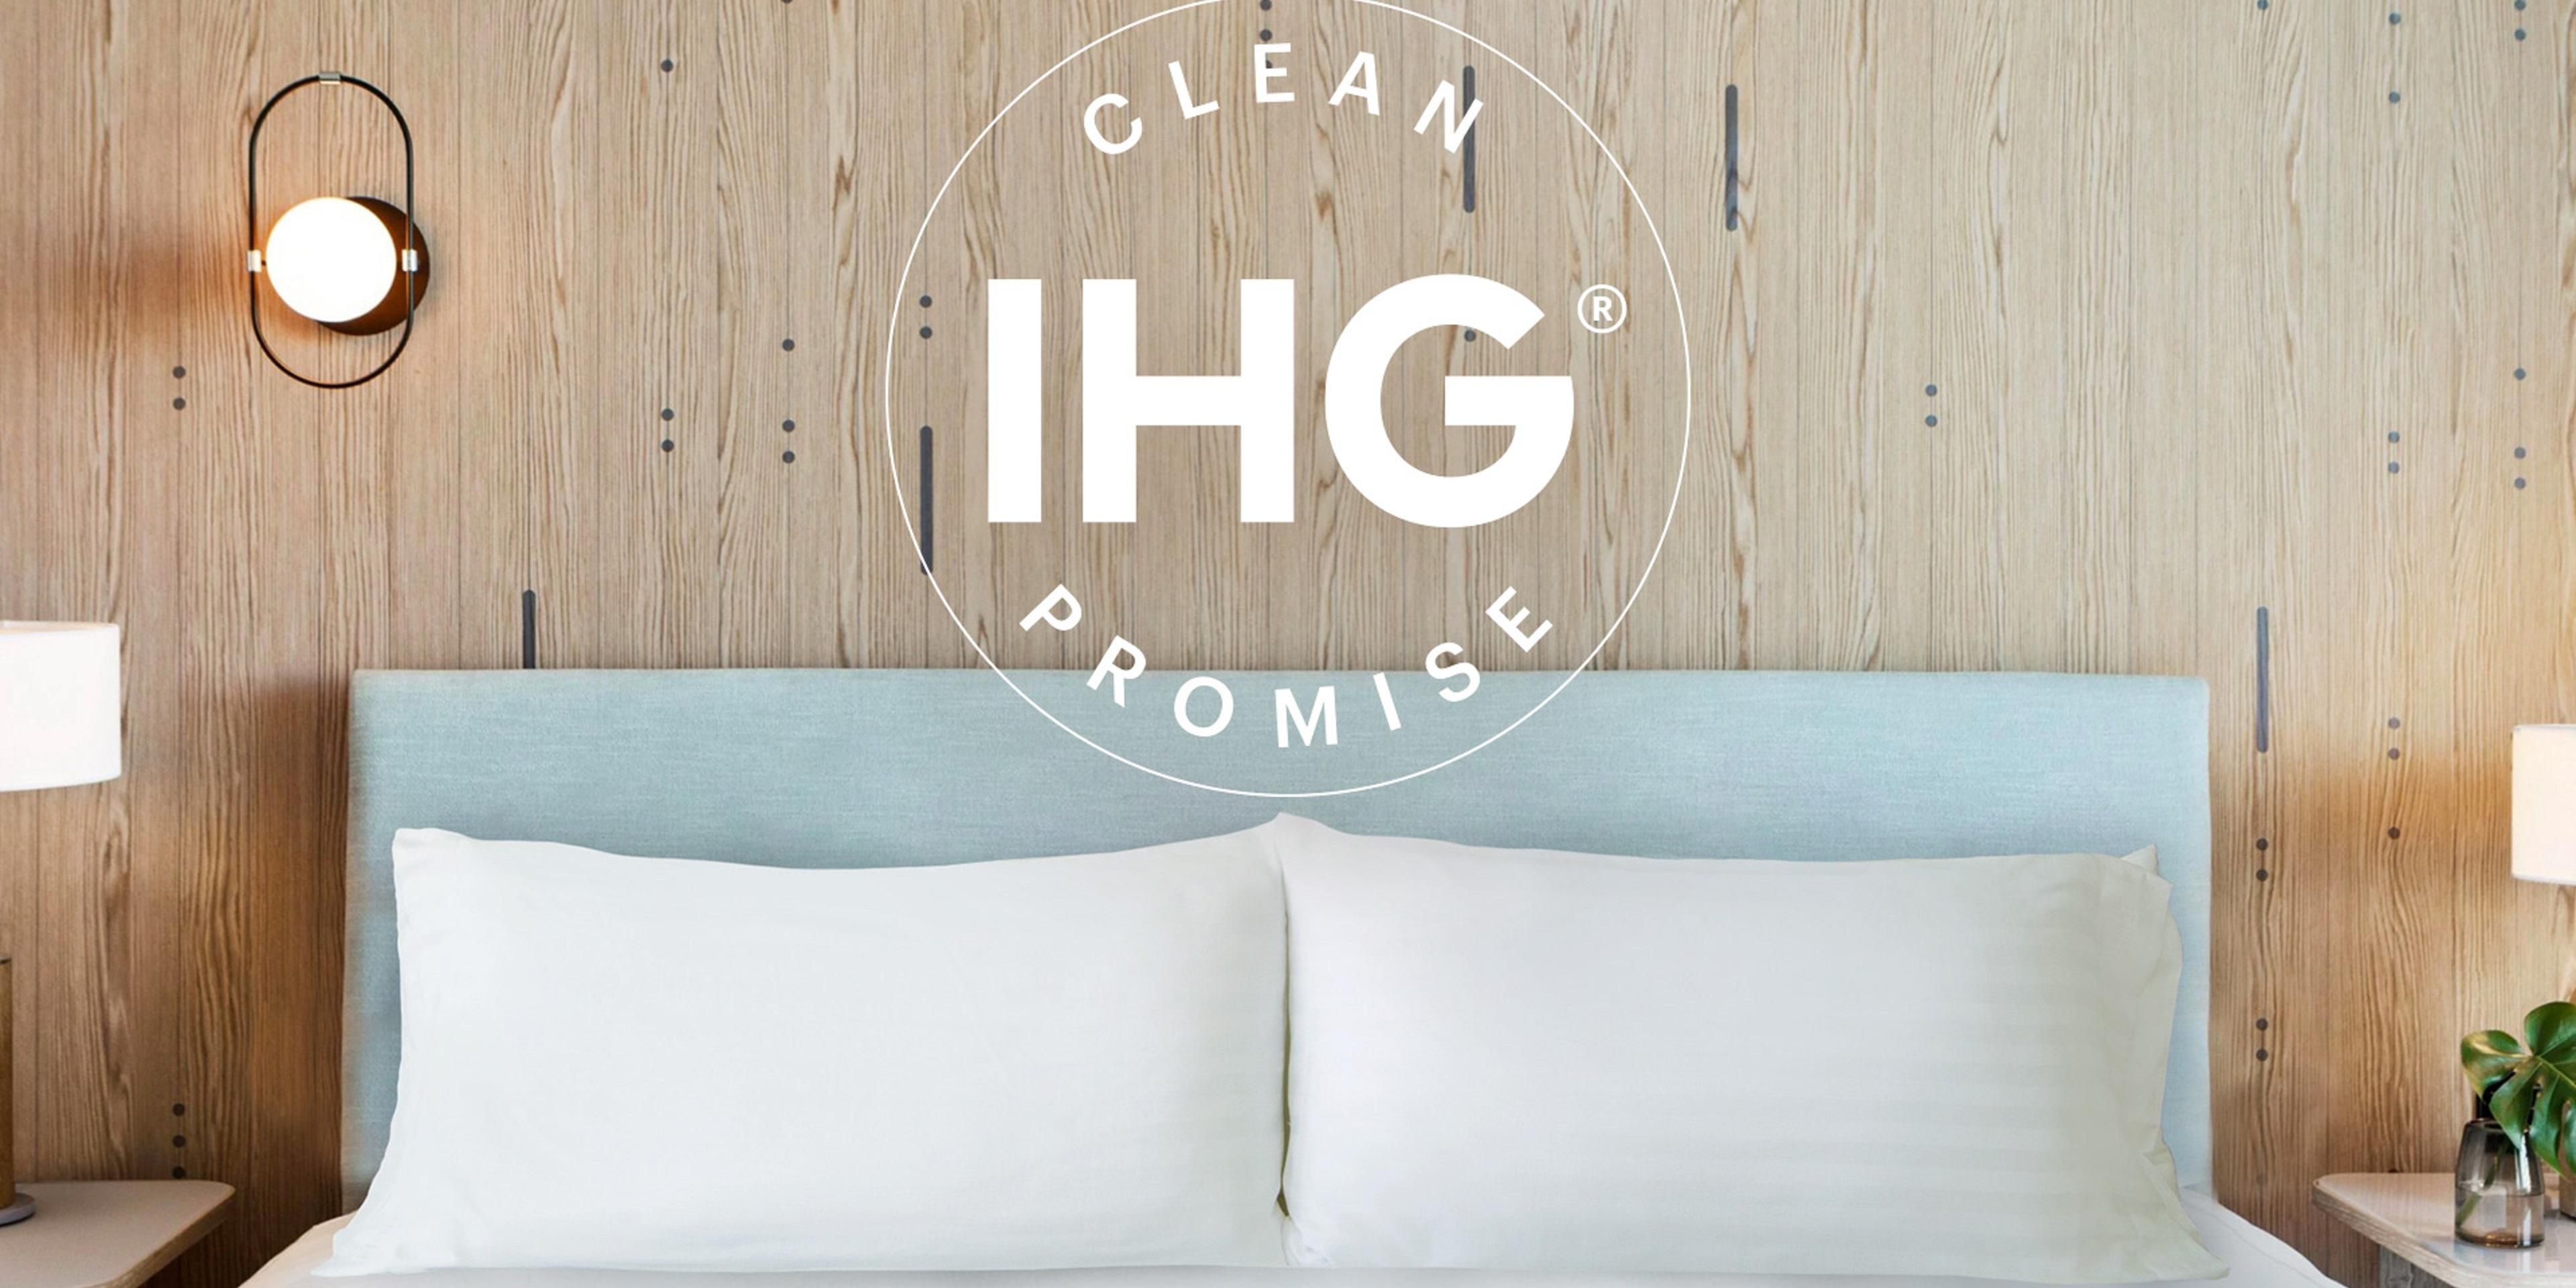 As the world adjusts to new travel norms and expectations, IHG® Hotels & Resorts is enhancing the experience for its hotel guests around the world, by redefining cleanliness and supporting guests’ personal wellbeing throughout their stay. Our hotel is committed to delivering on this promise and confident you will notice the difference!